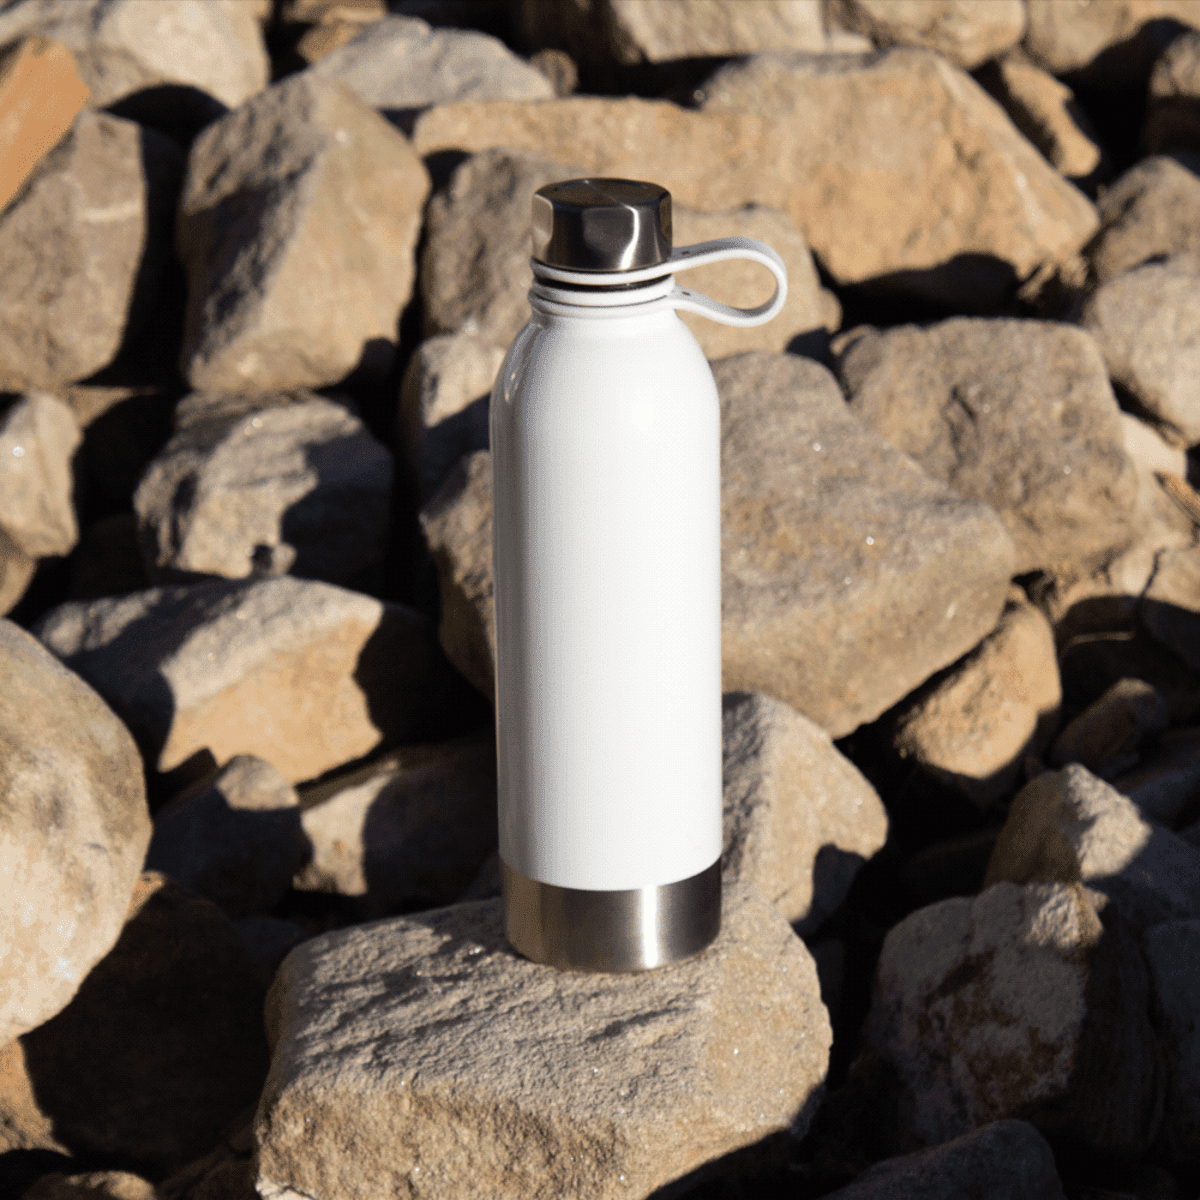 Perth 750ml Stainless Sports Bottle